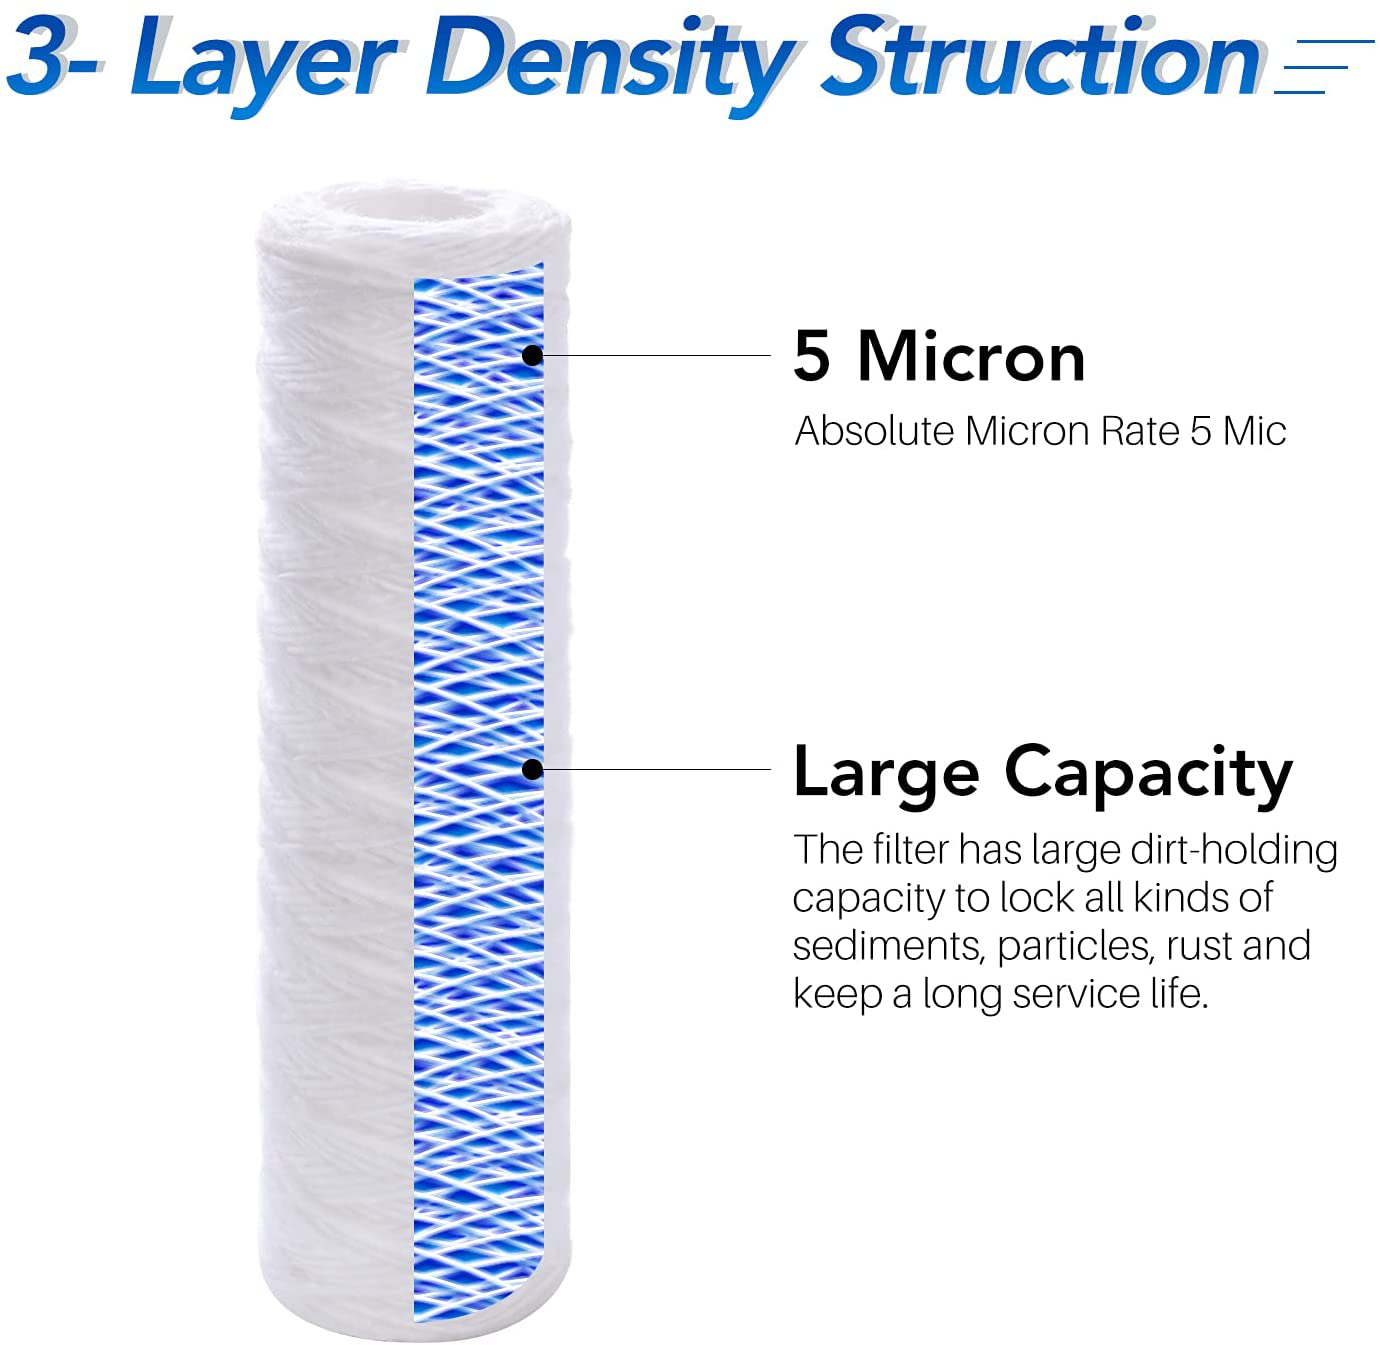 5 Micron 10" x 2.5" String Wound Sediment Water Filter Cartridge for Well filter Universal Replacement for Any 10 inch RO Unit, WP-5, Aqua-Pure AP110, CFS110, Culligan P5, WFPFC4002, WP-5, CW-MF,4PACK